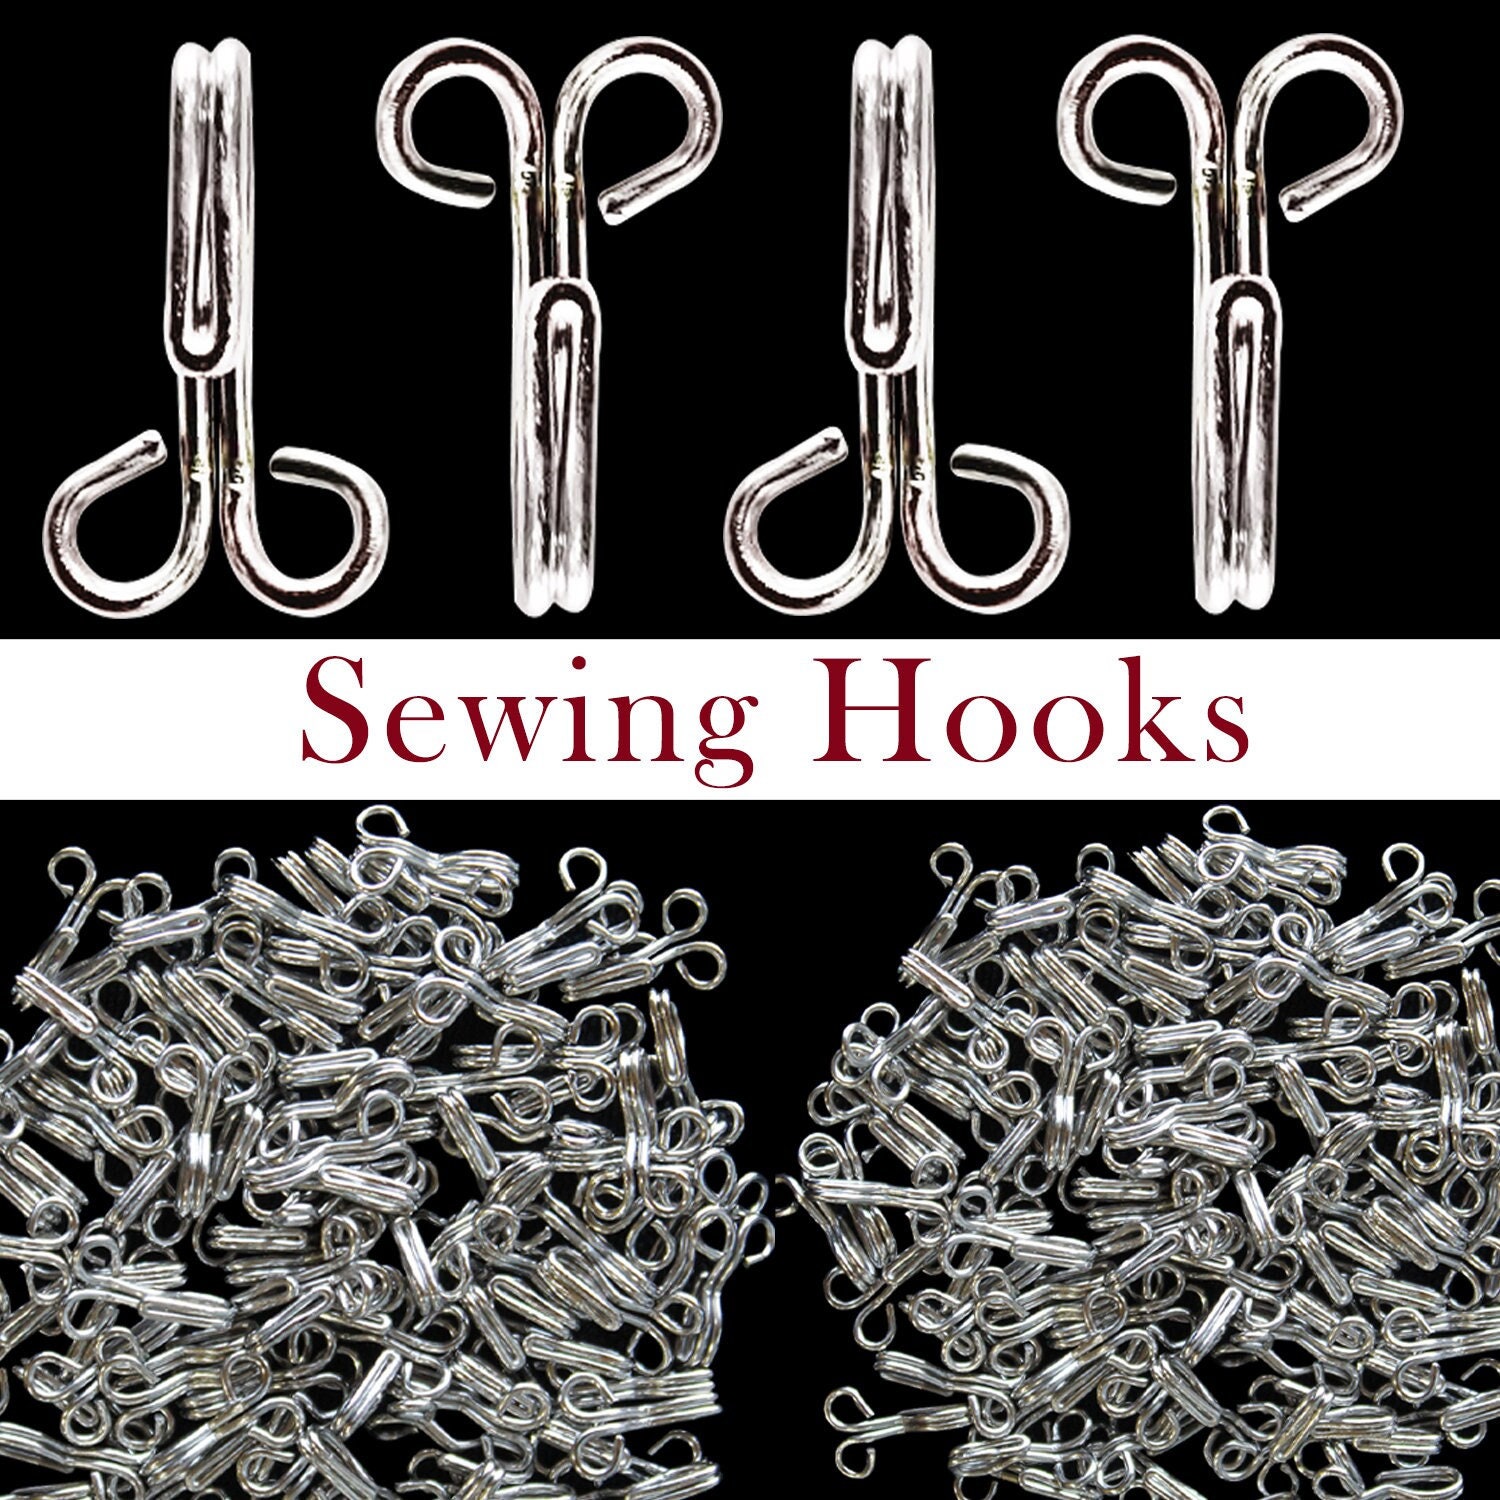 Hook and Bar Sewing Eye Closure Bar Fasteners for Trousers Skirts